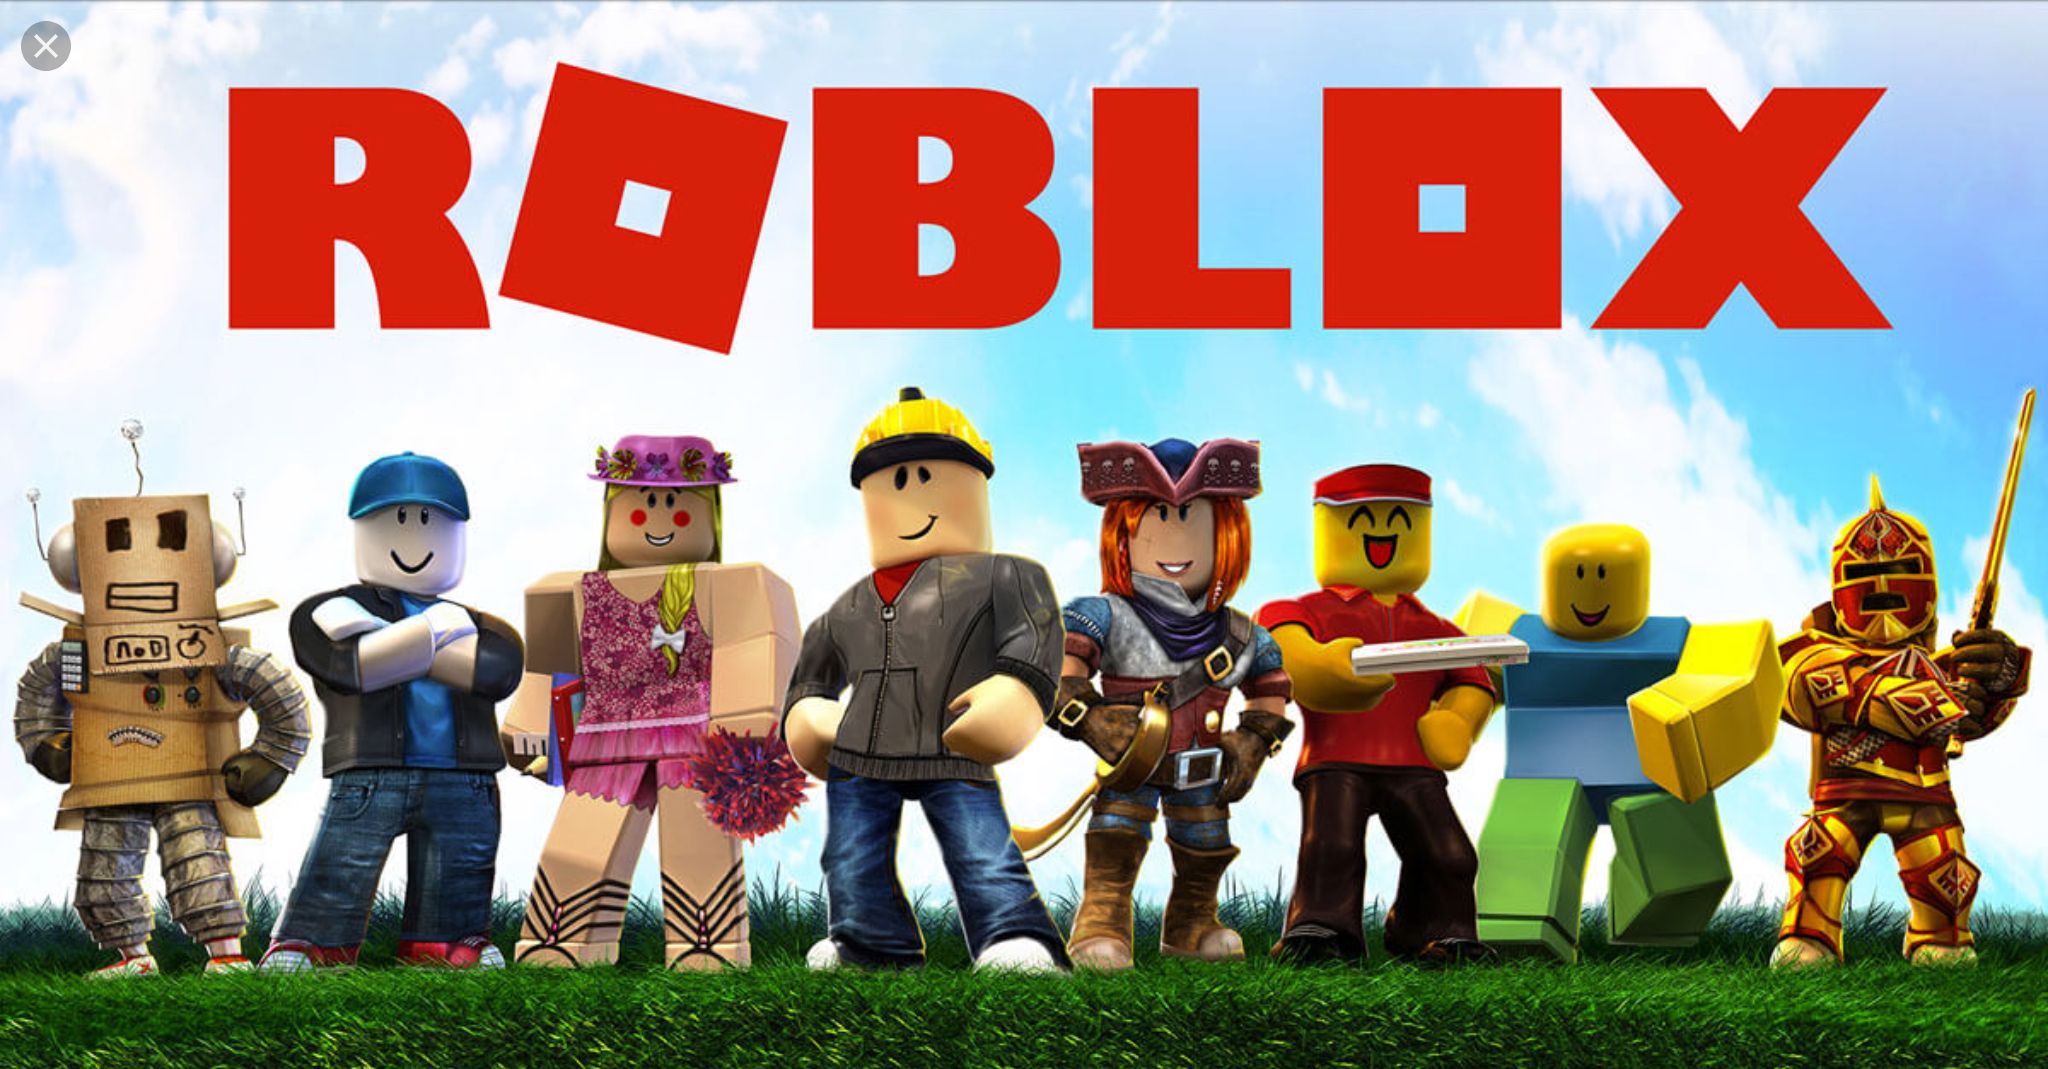 Roblox Character Wallpaper Free Roblox Character Background